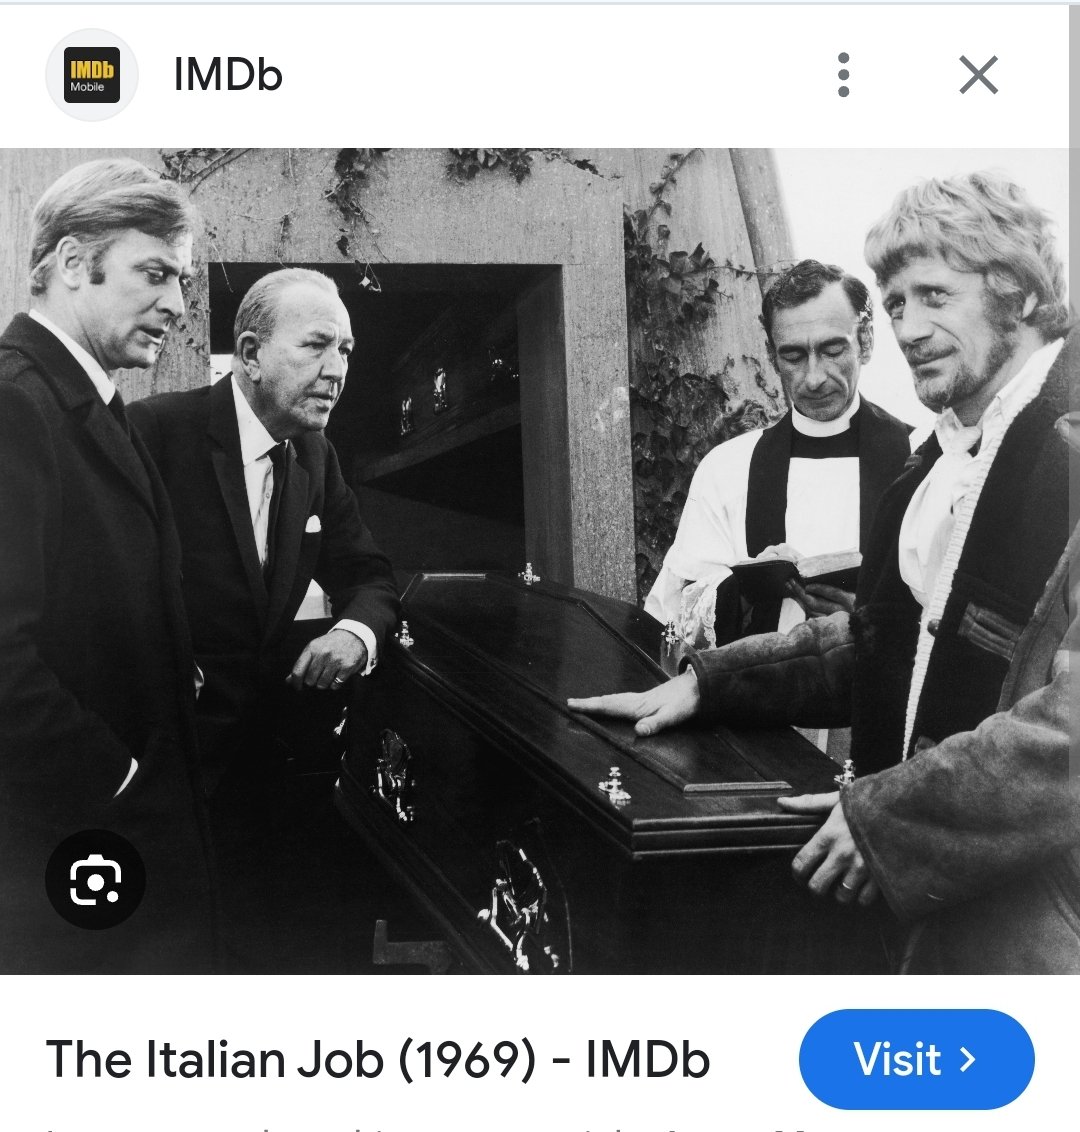 Watched the Italian Job today for the millionth time and never noticed before that the late, great David Kelly (Strumpet City, Fawlty Towers, Willy Wonka) played the Vicar 😁 @ScreenIreland @IFTA @FilmIreland @irishfilmtvuk @IFTN